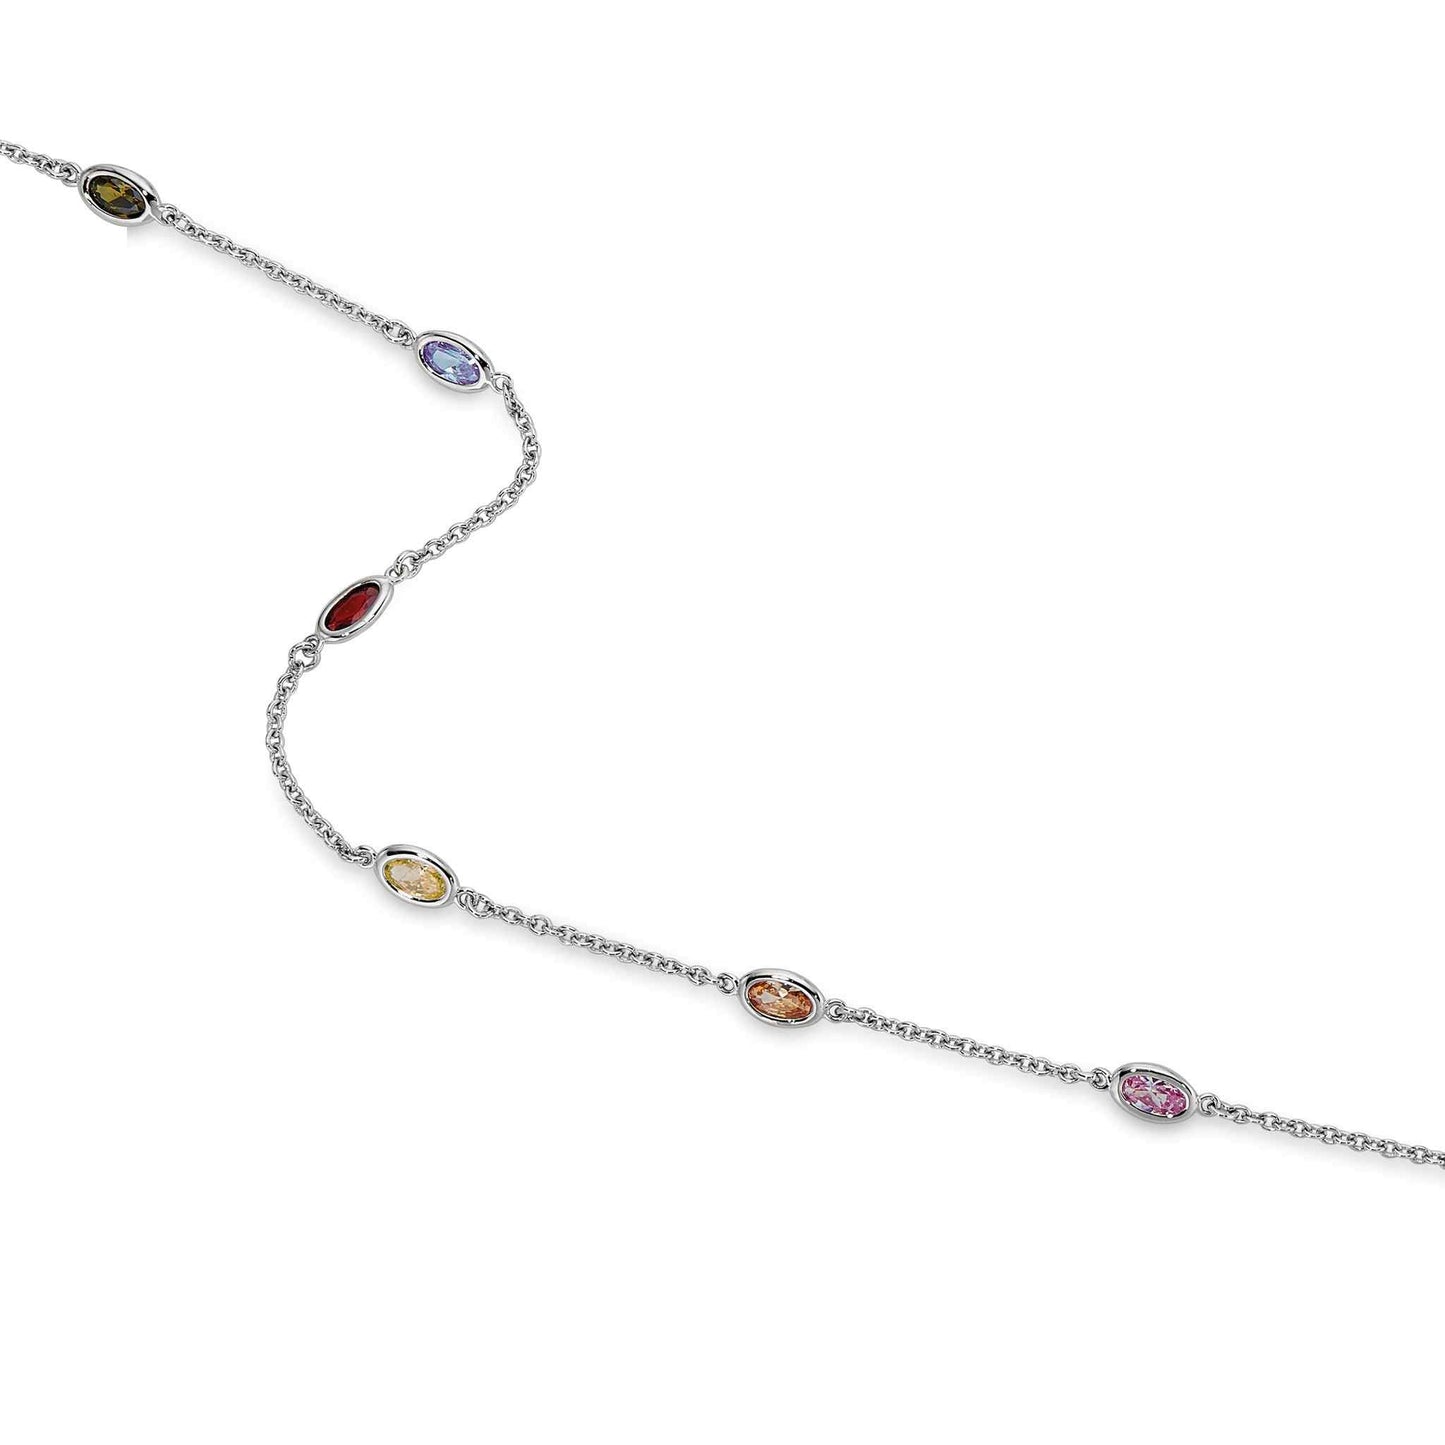 A station necklace with colored stones displayed on a neutral white background.